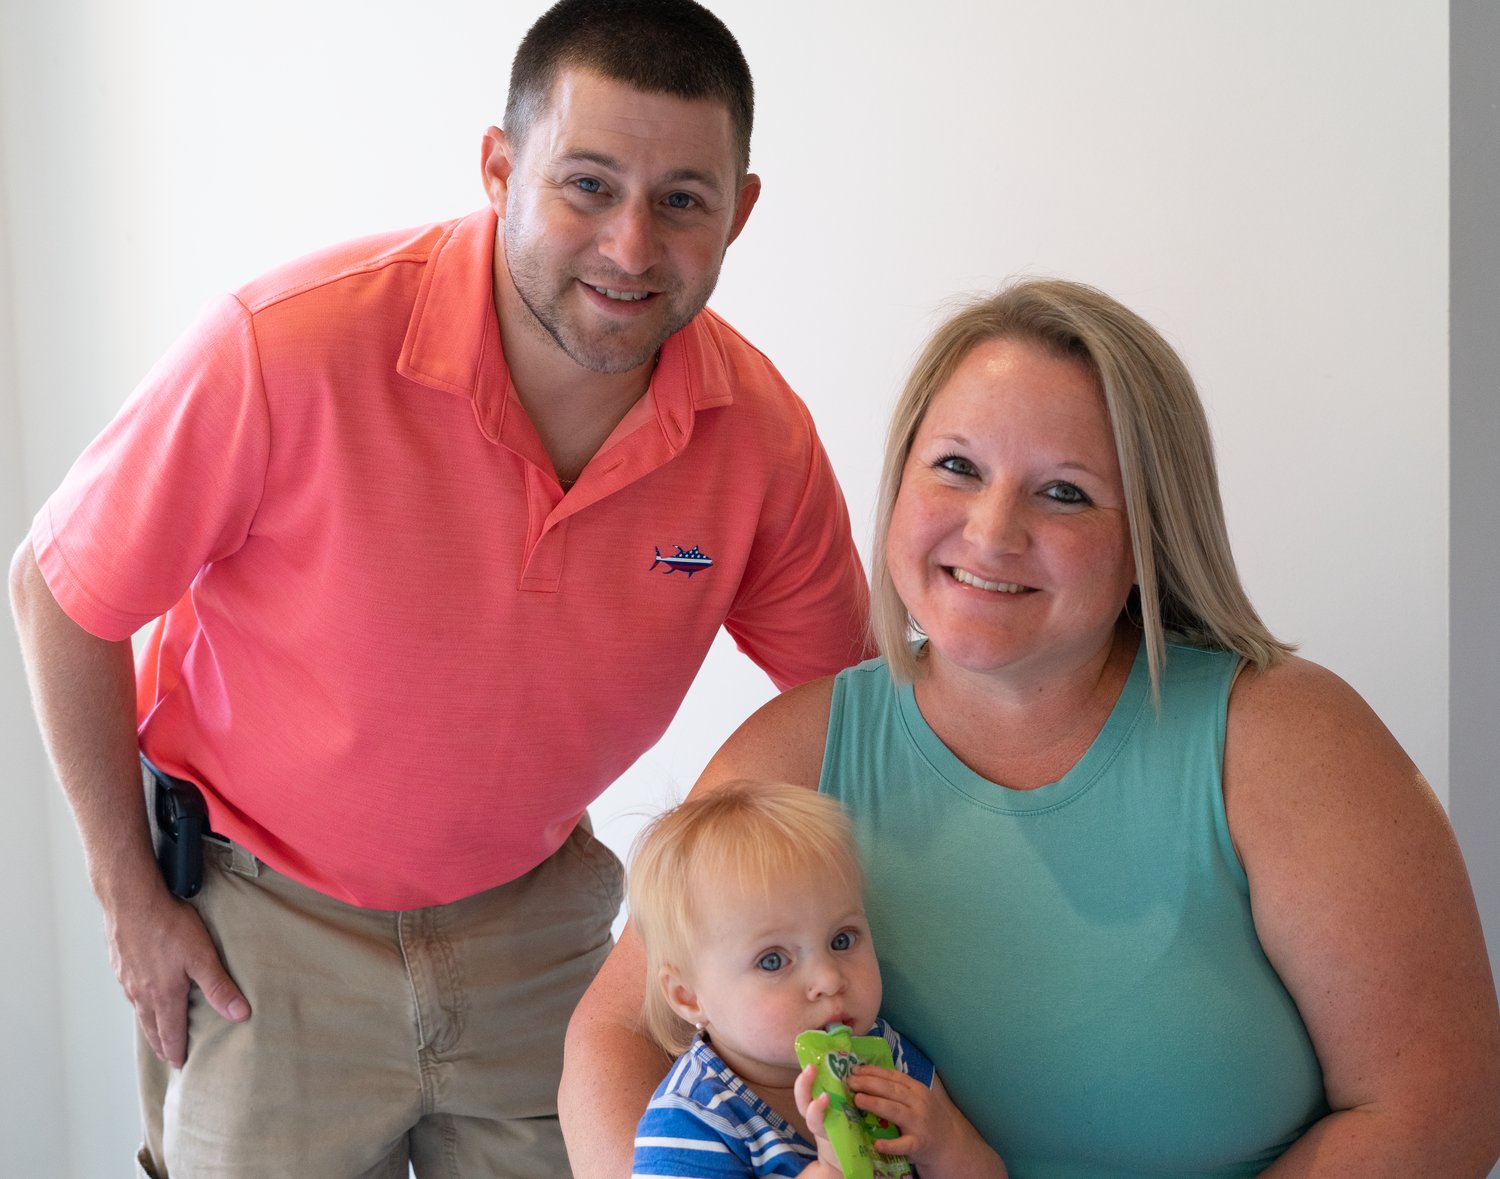 Steven Fussell, Cyndi Fussell and their daughter, Baylee Fussell